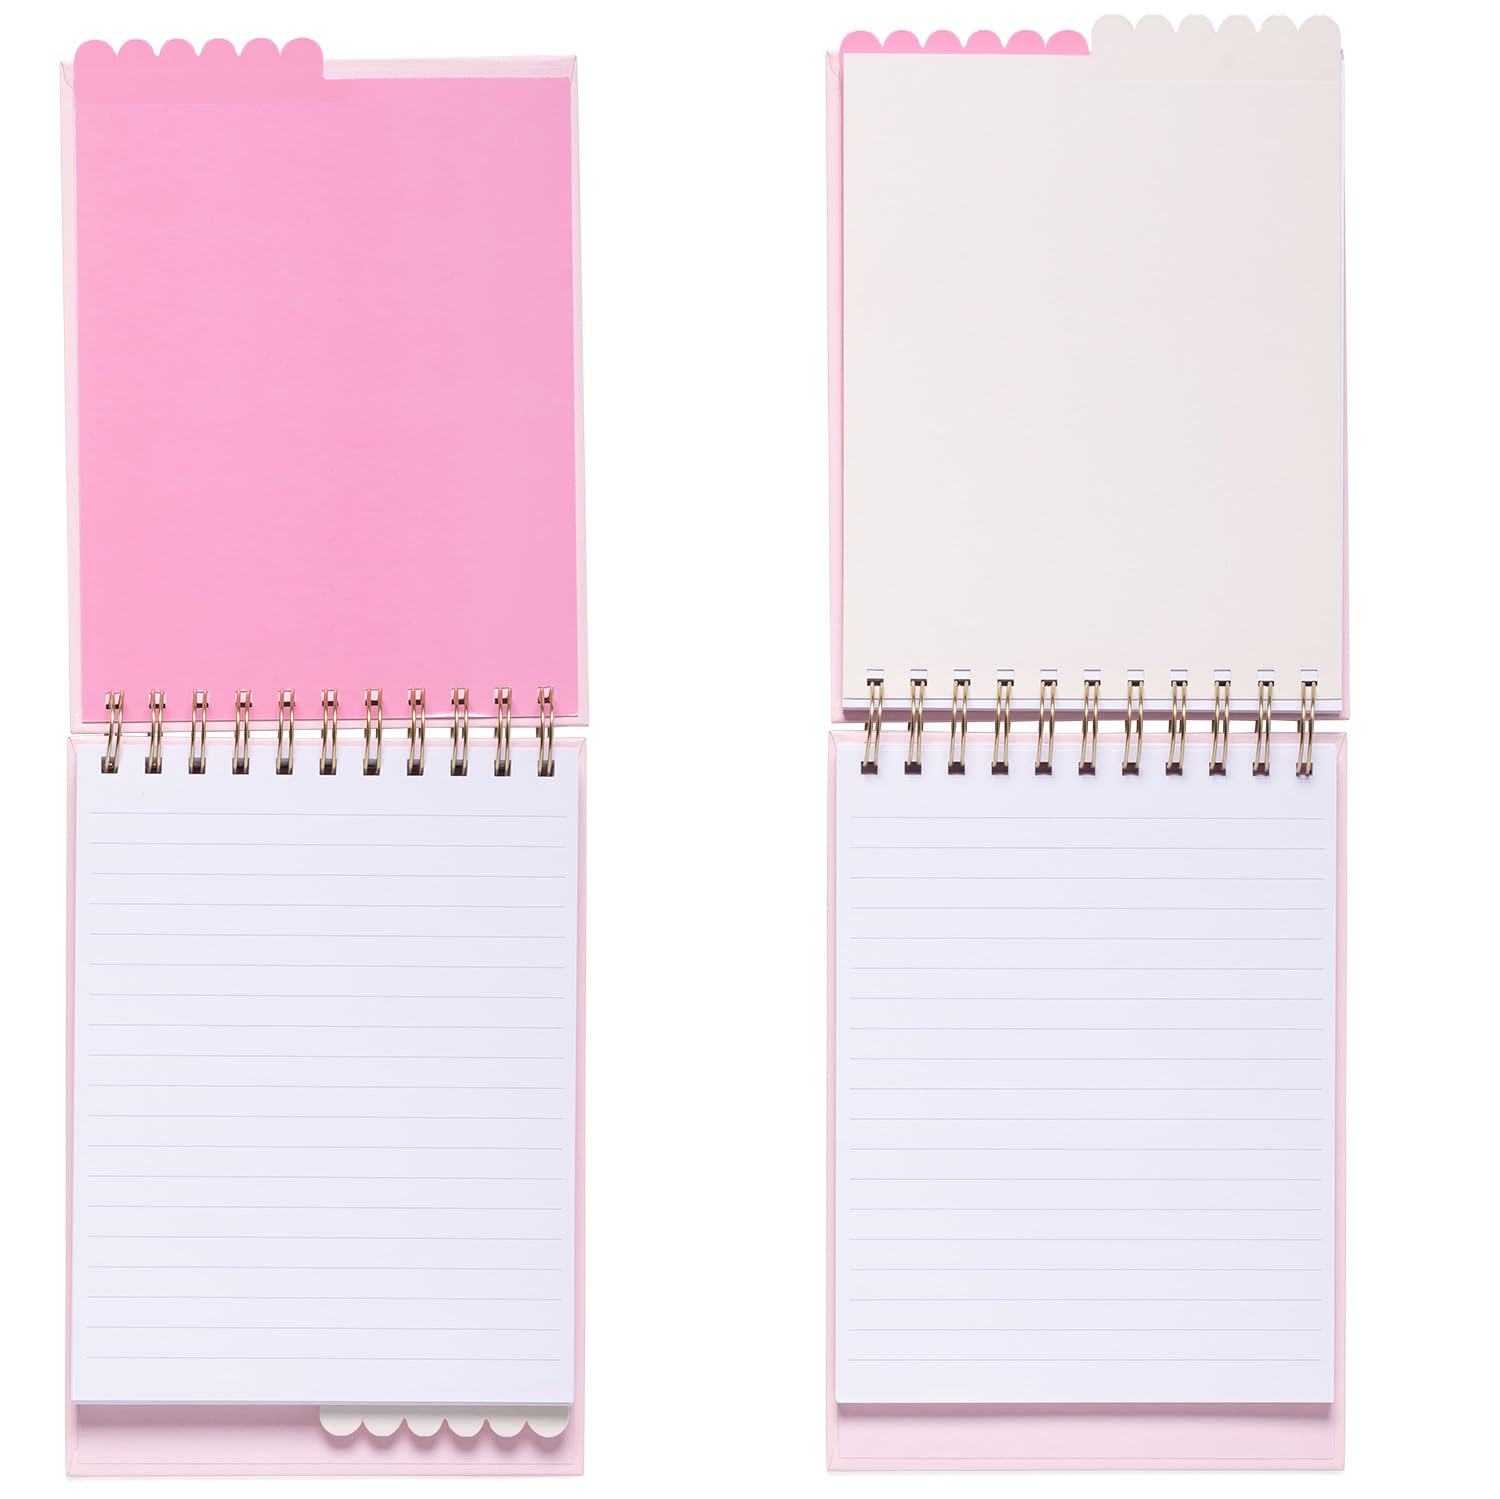 Portable A5 Notepad Ideal for Note Taking